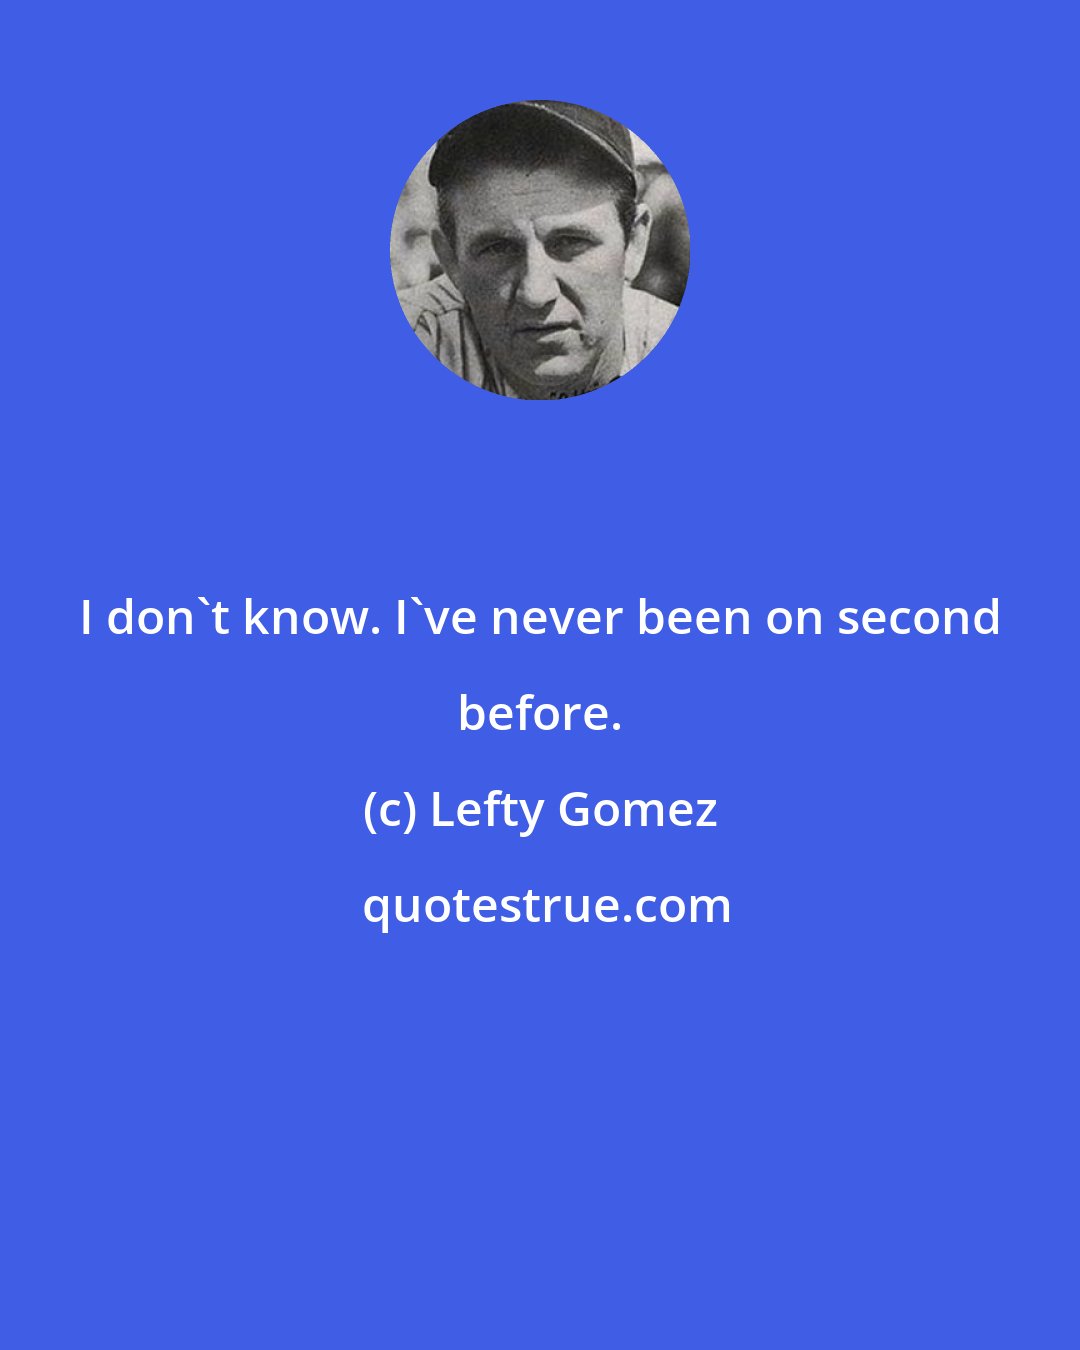 Lefty Gomez: I don't know. I've never been on second before.